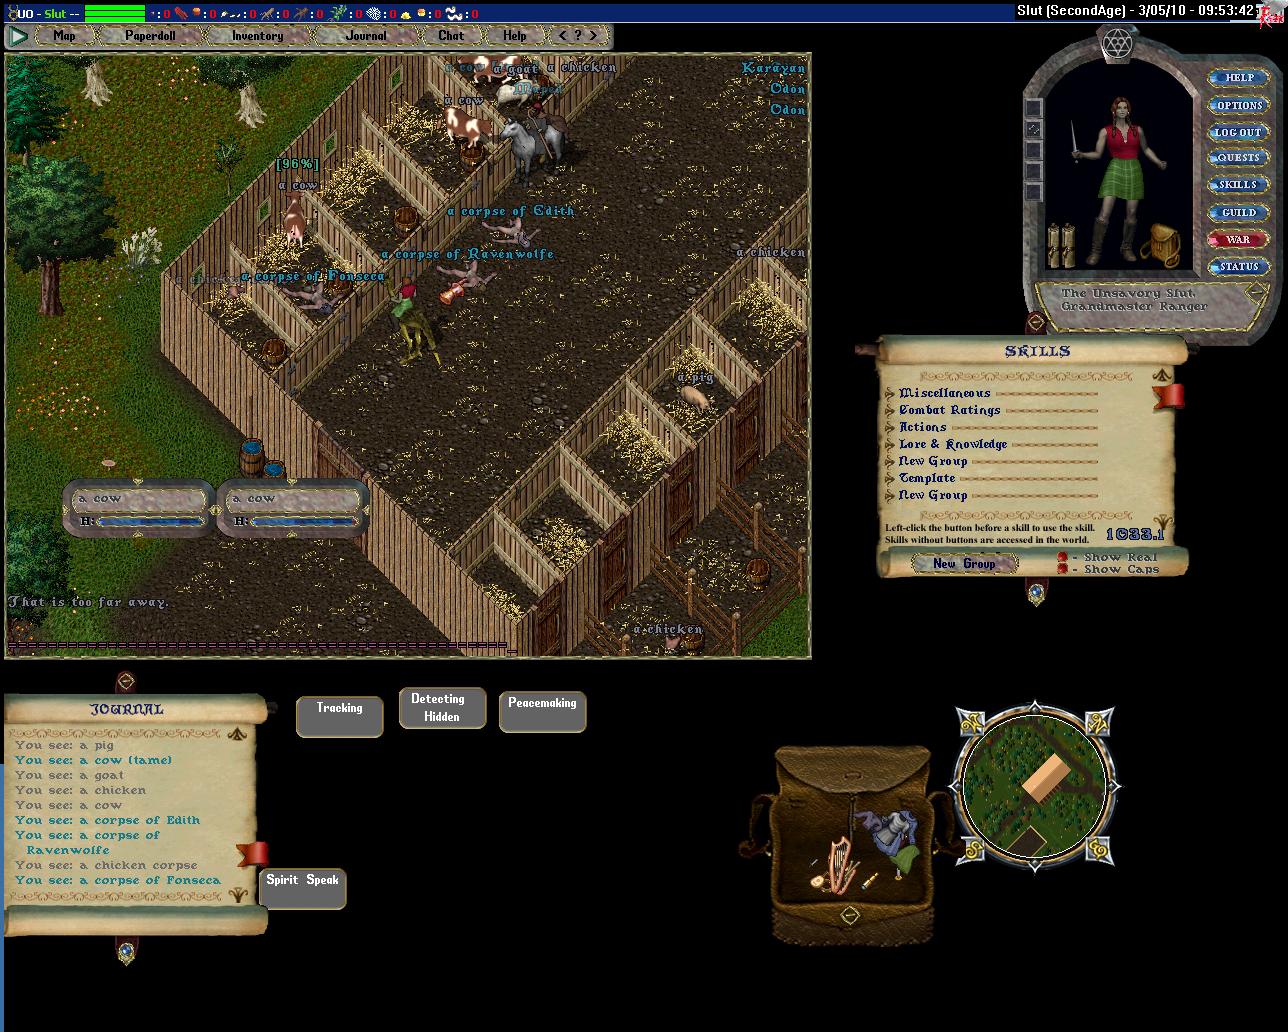 Pic Of the Day for Tuesday, June 29, 2010!
The reason you don't afk provoke in brit stables